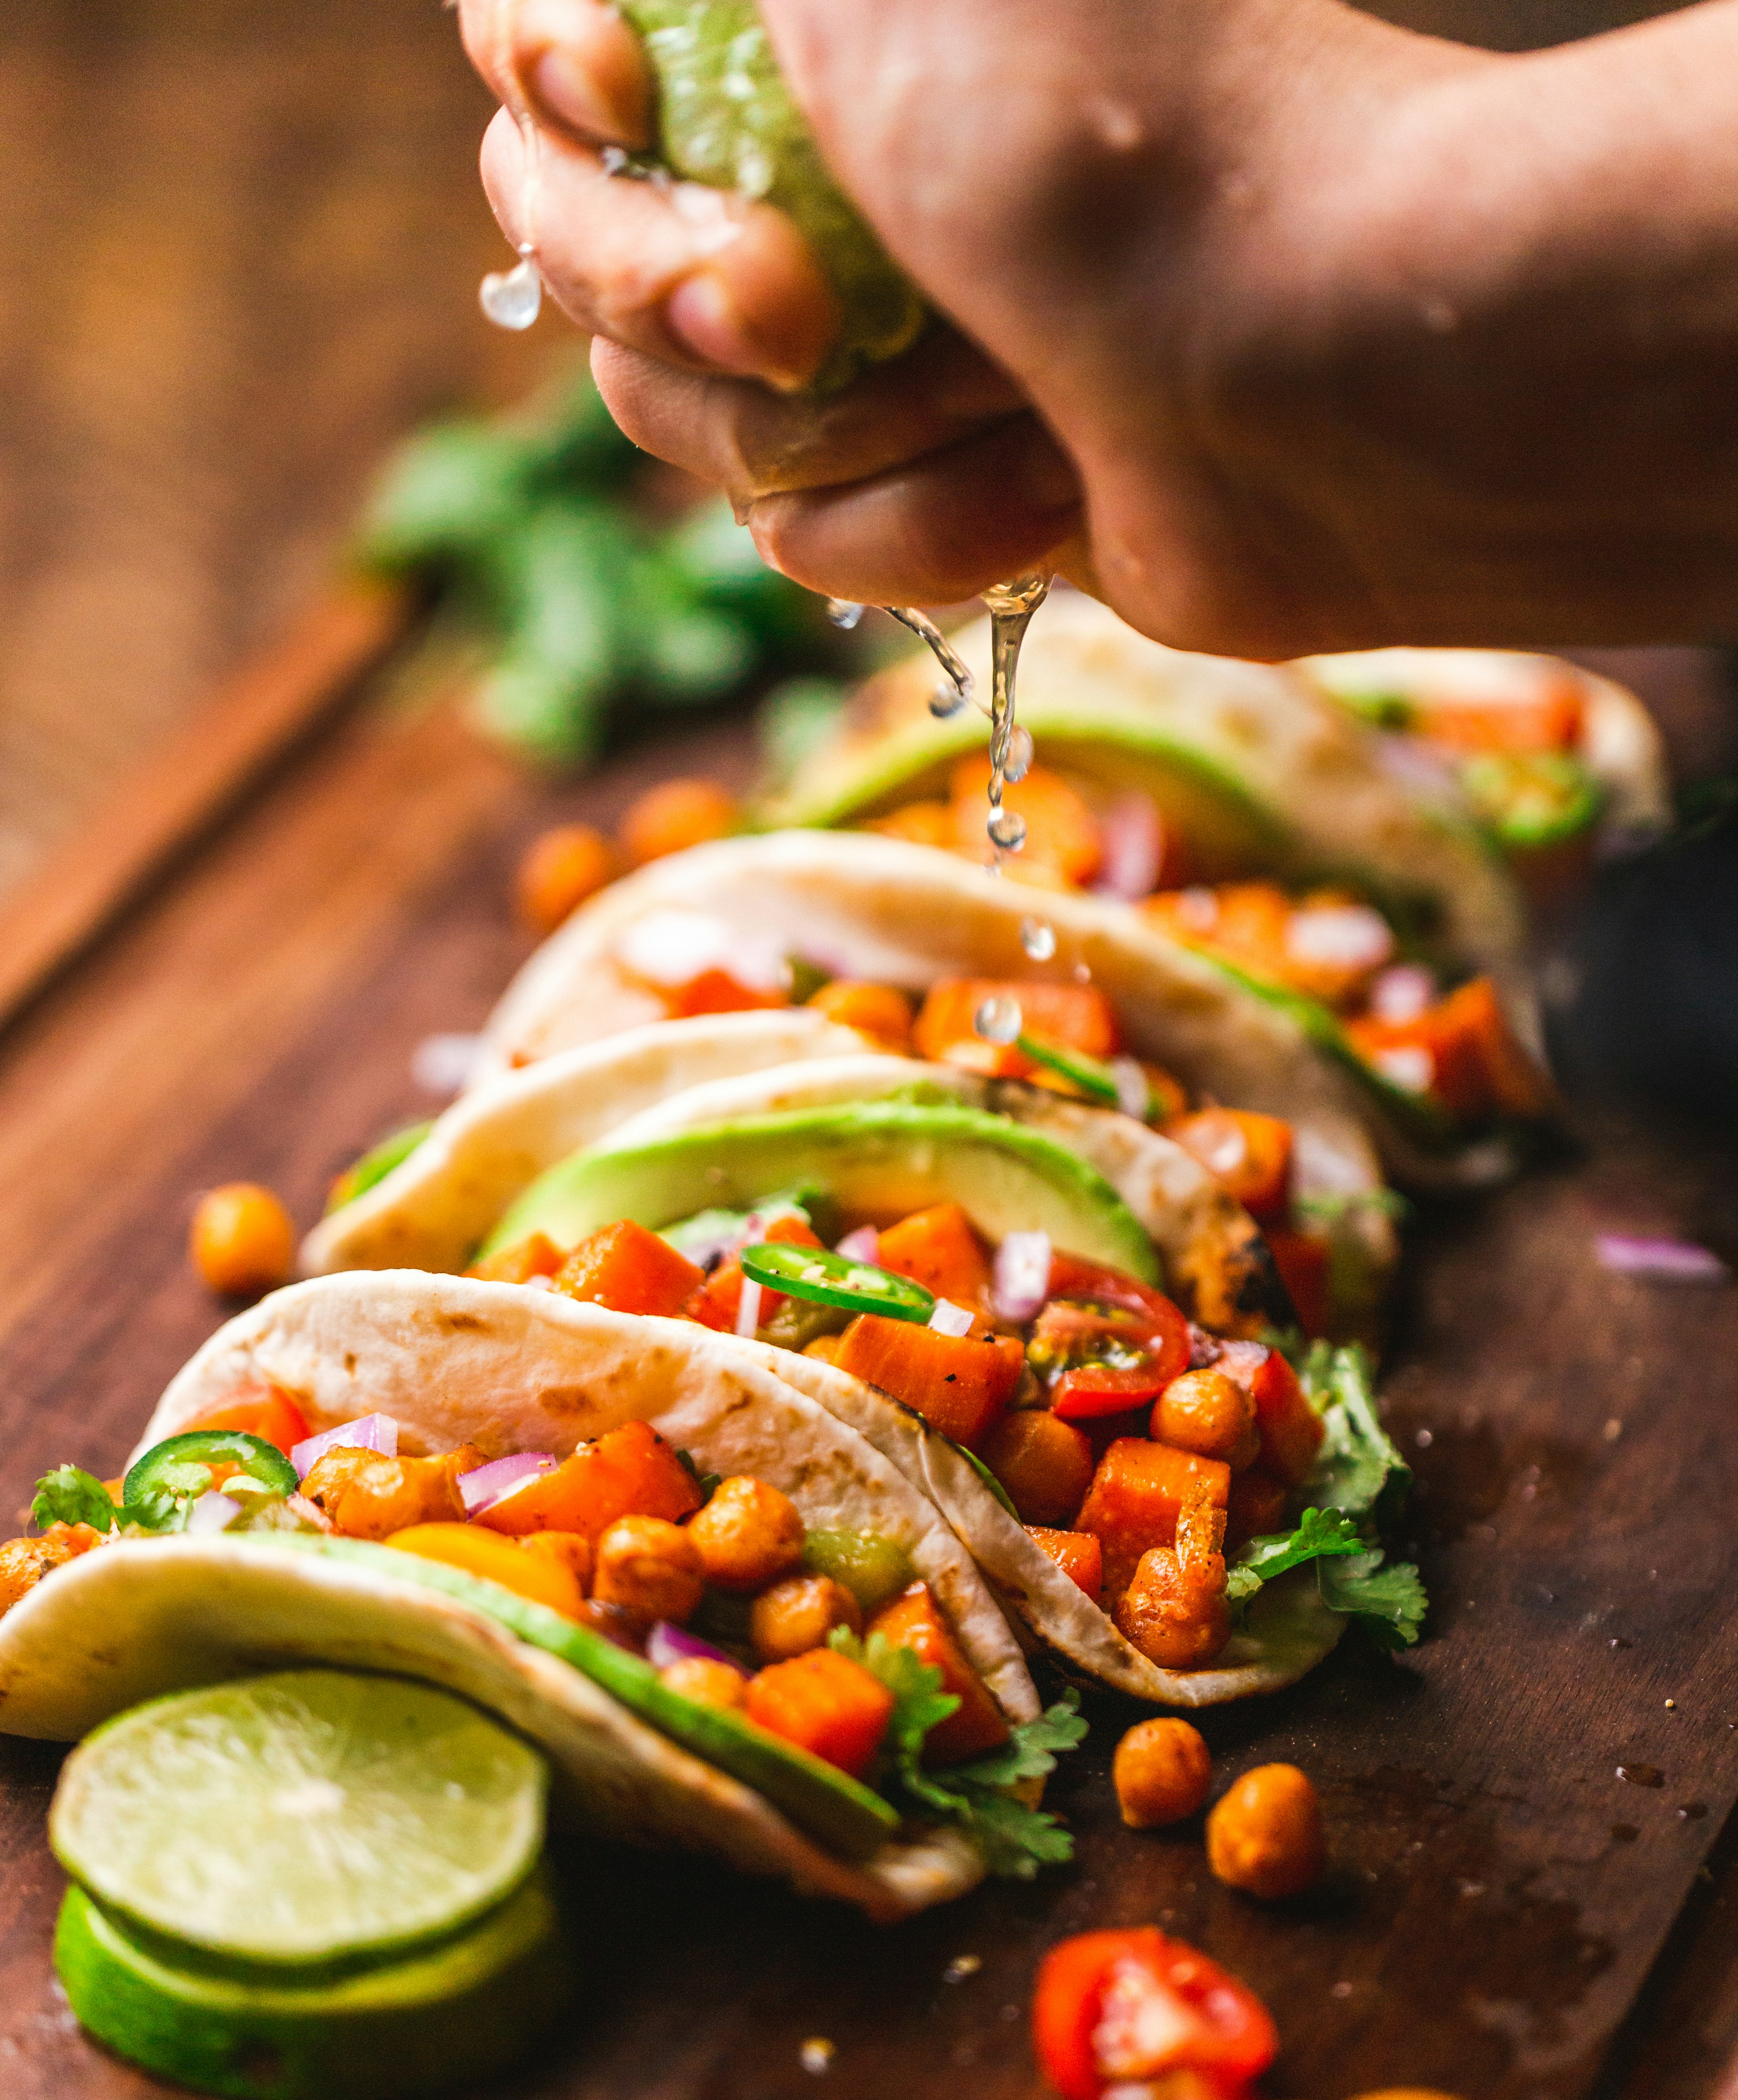 A hand sqeezes a lime over a row of veggie tacos on a wooden slab